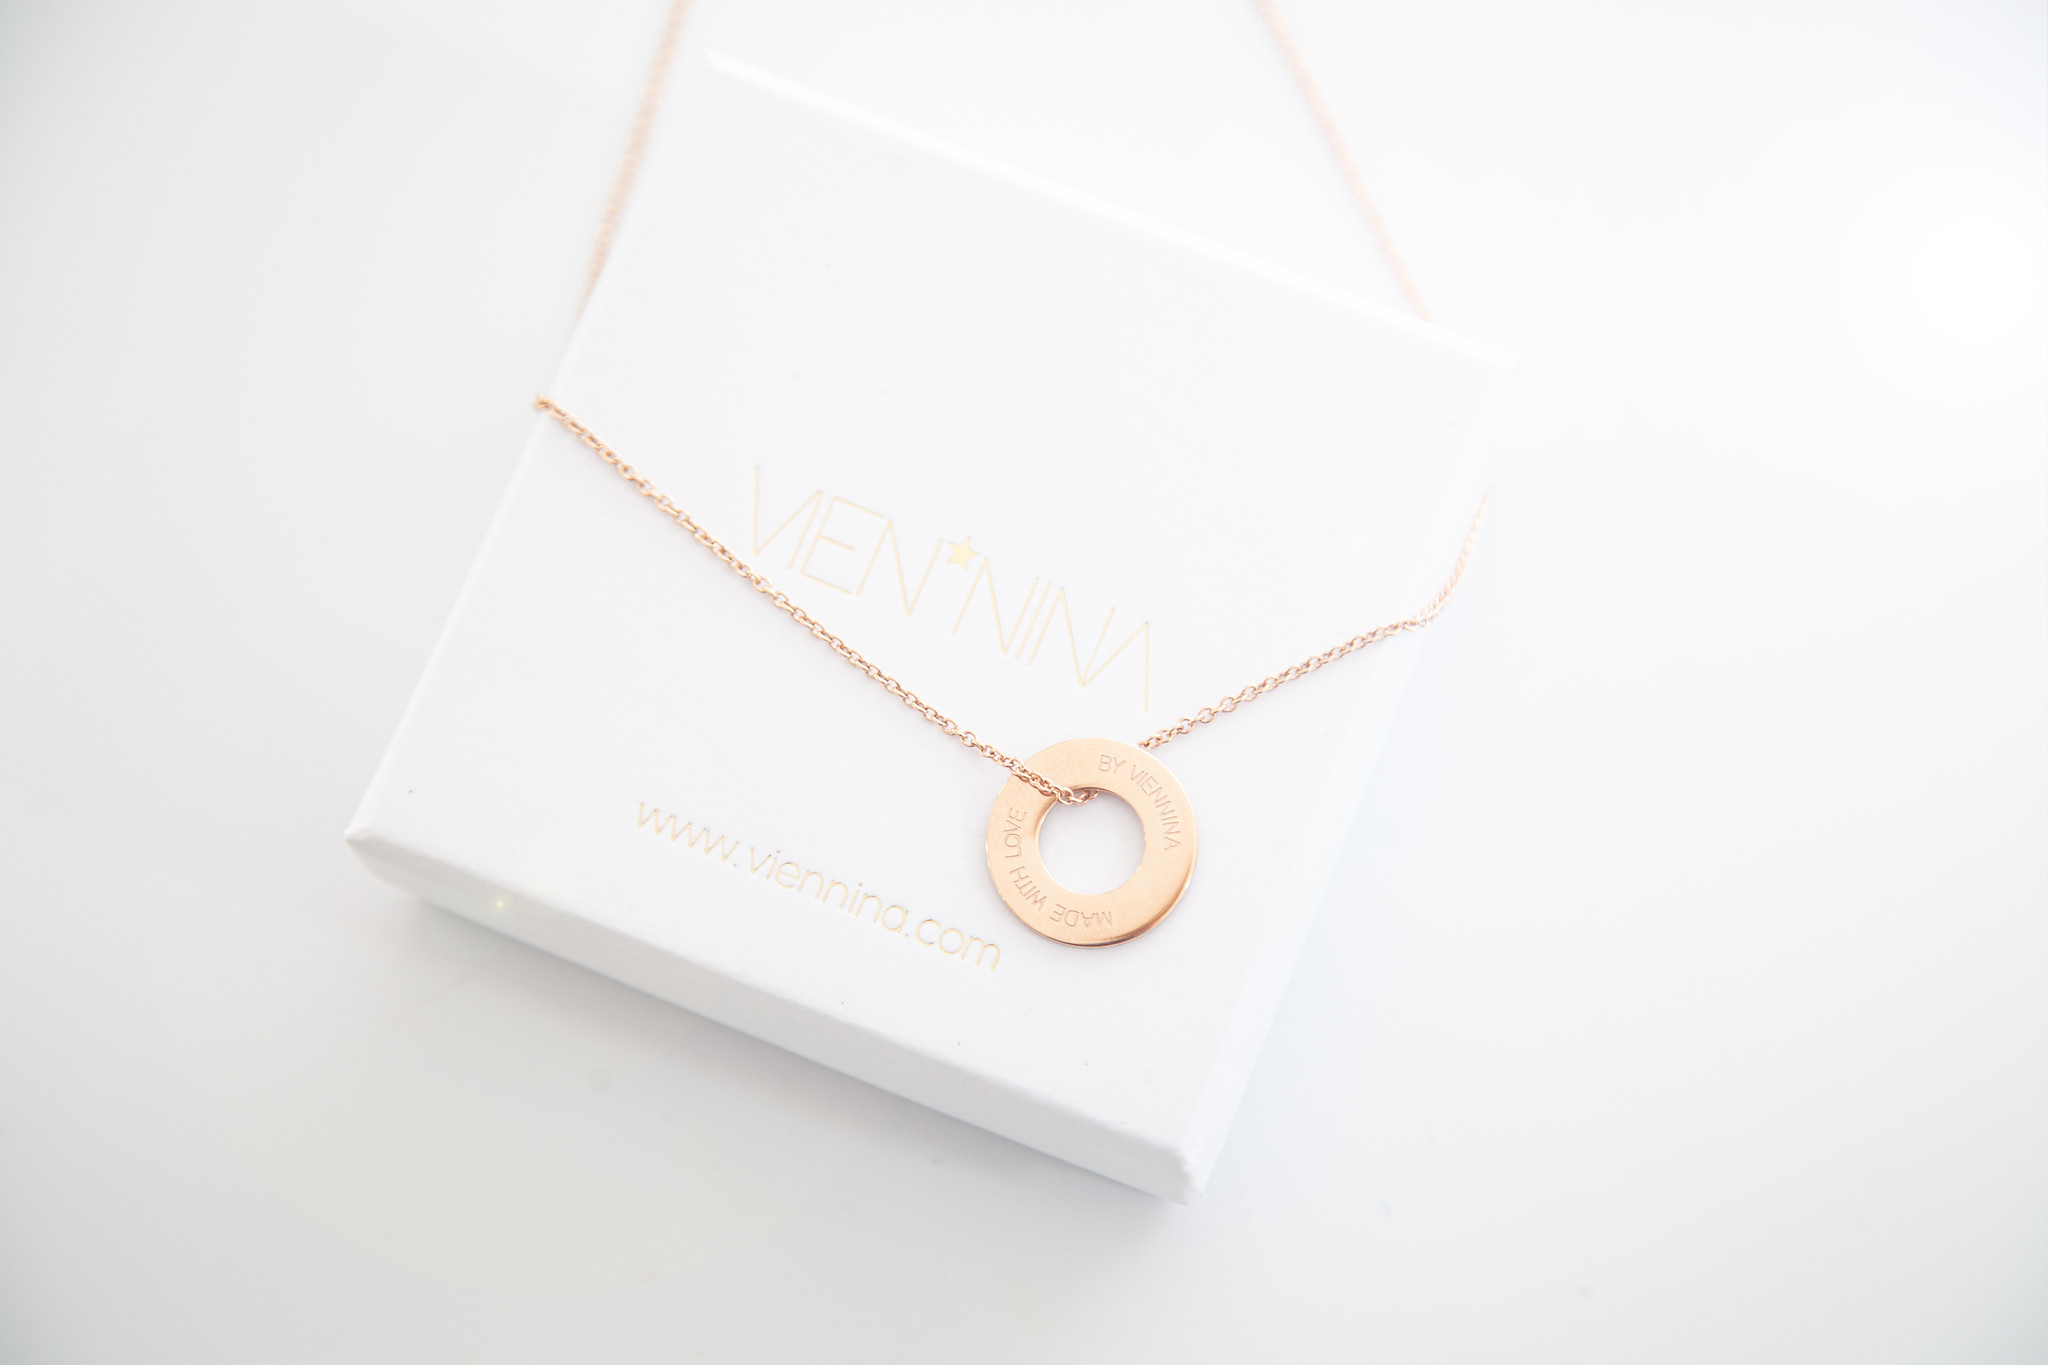 NECKLACE/ large rosegolden glossy "MADE WITH LOVE BY VIENNINA" / N*FINITY